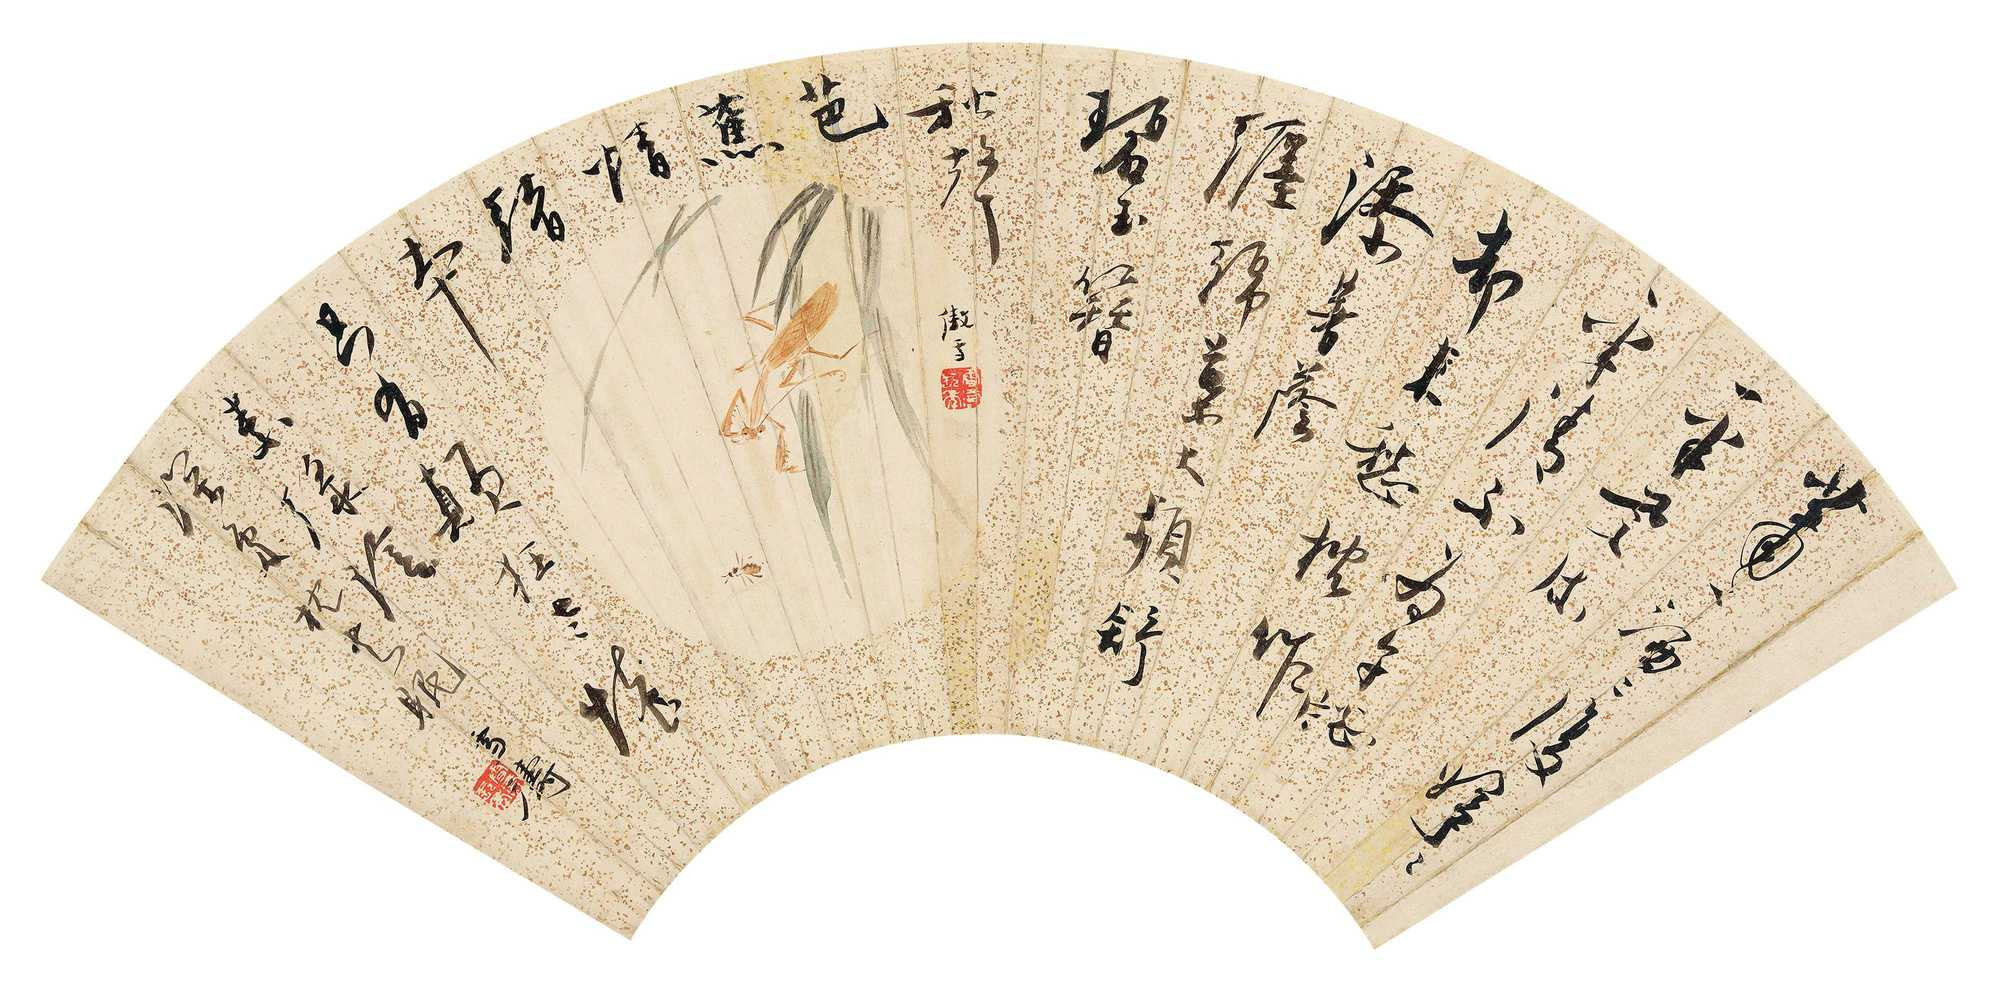 Insects and Calligraphy